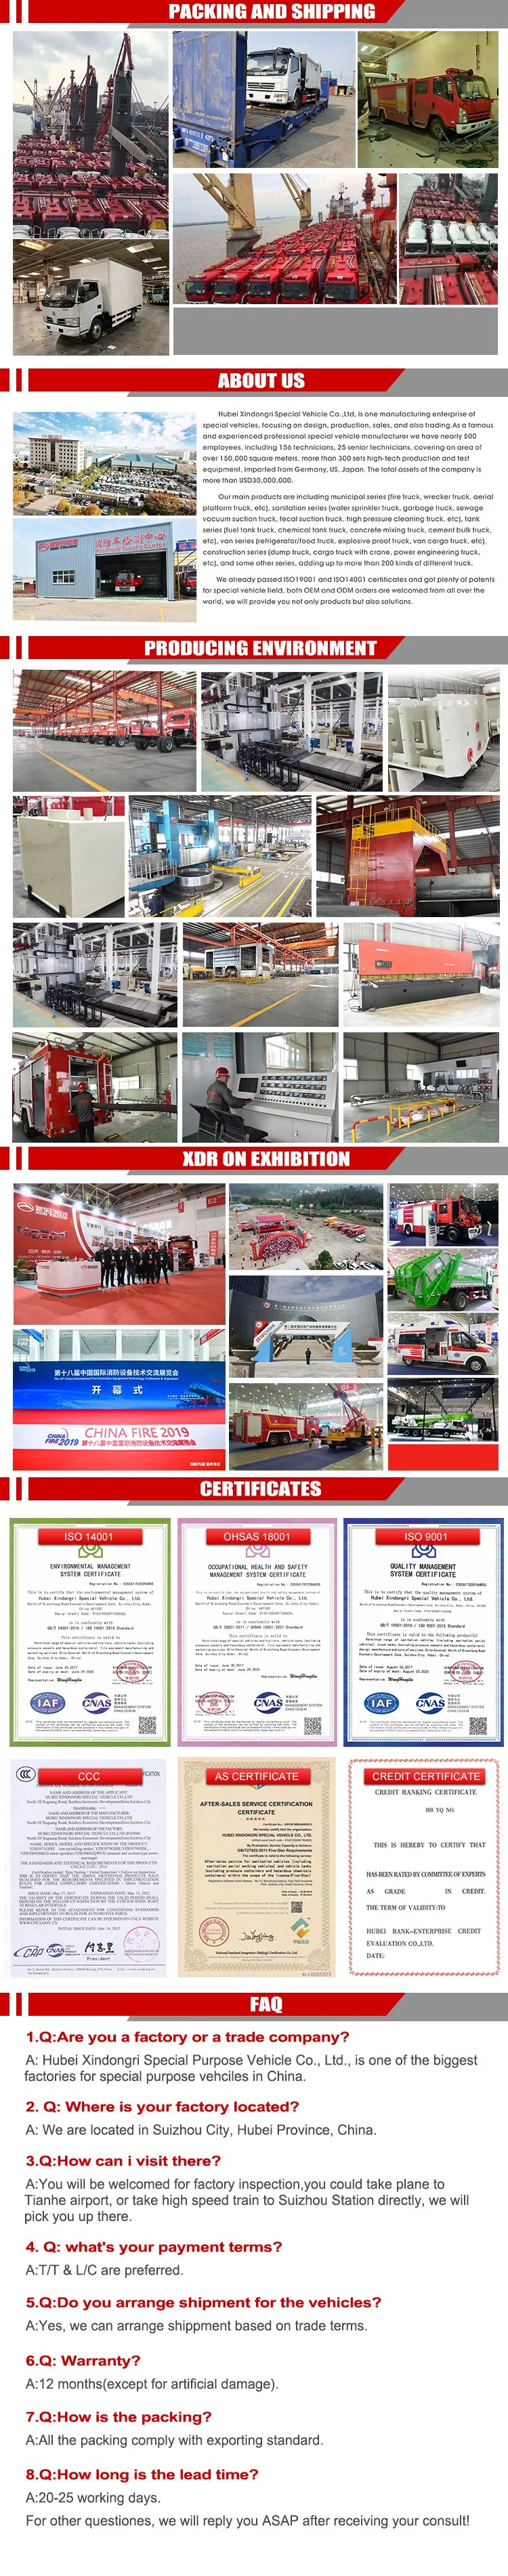 Manufacturer Sinotruk HOWO 2.5tons 5tons Fire Extinguisher Truck with Water/ Foam